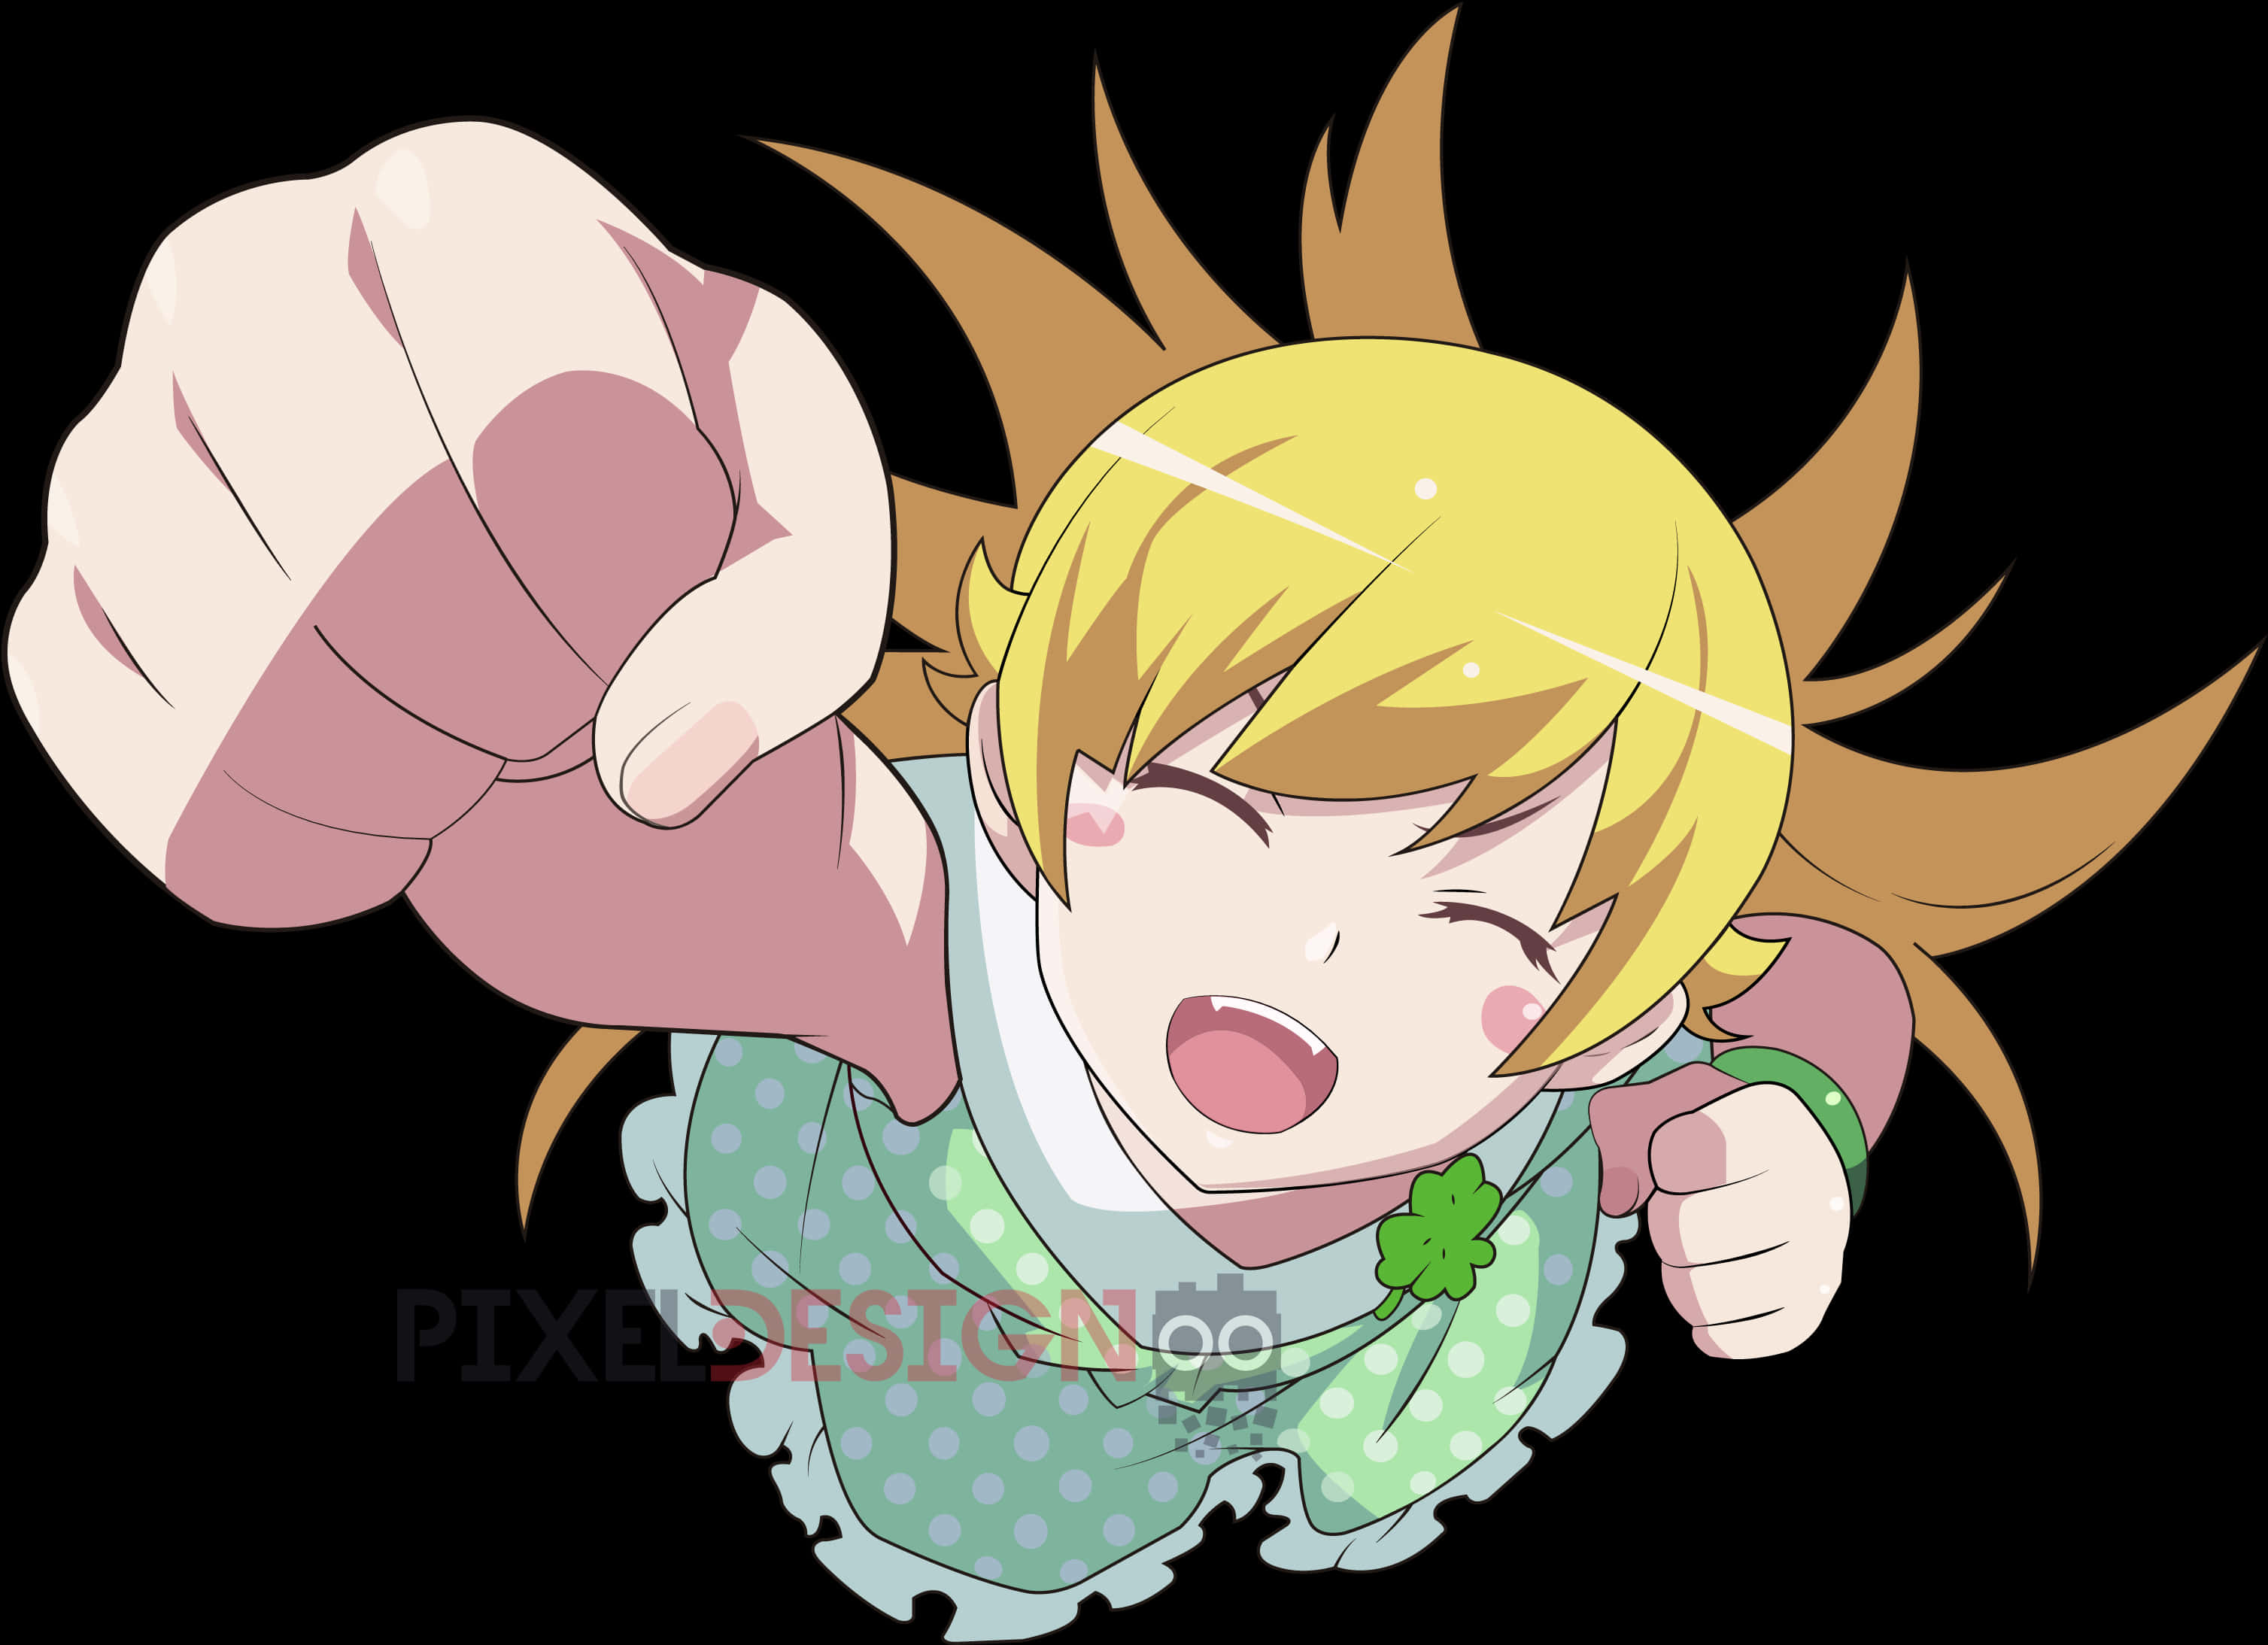 A Cartoon Of A Girl With Her Fist Up